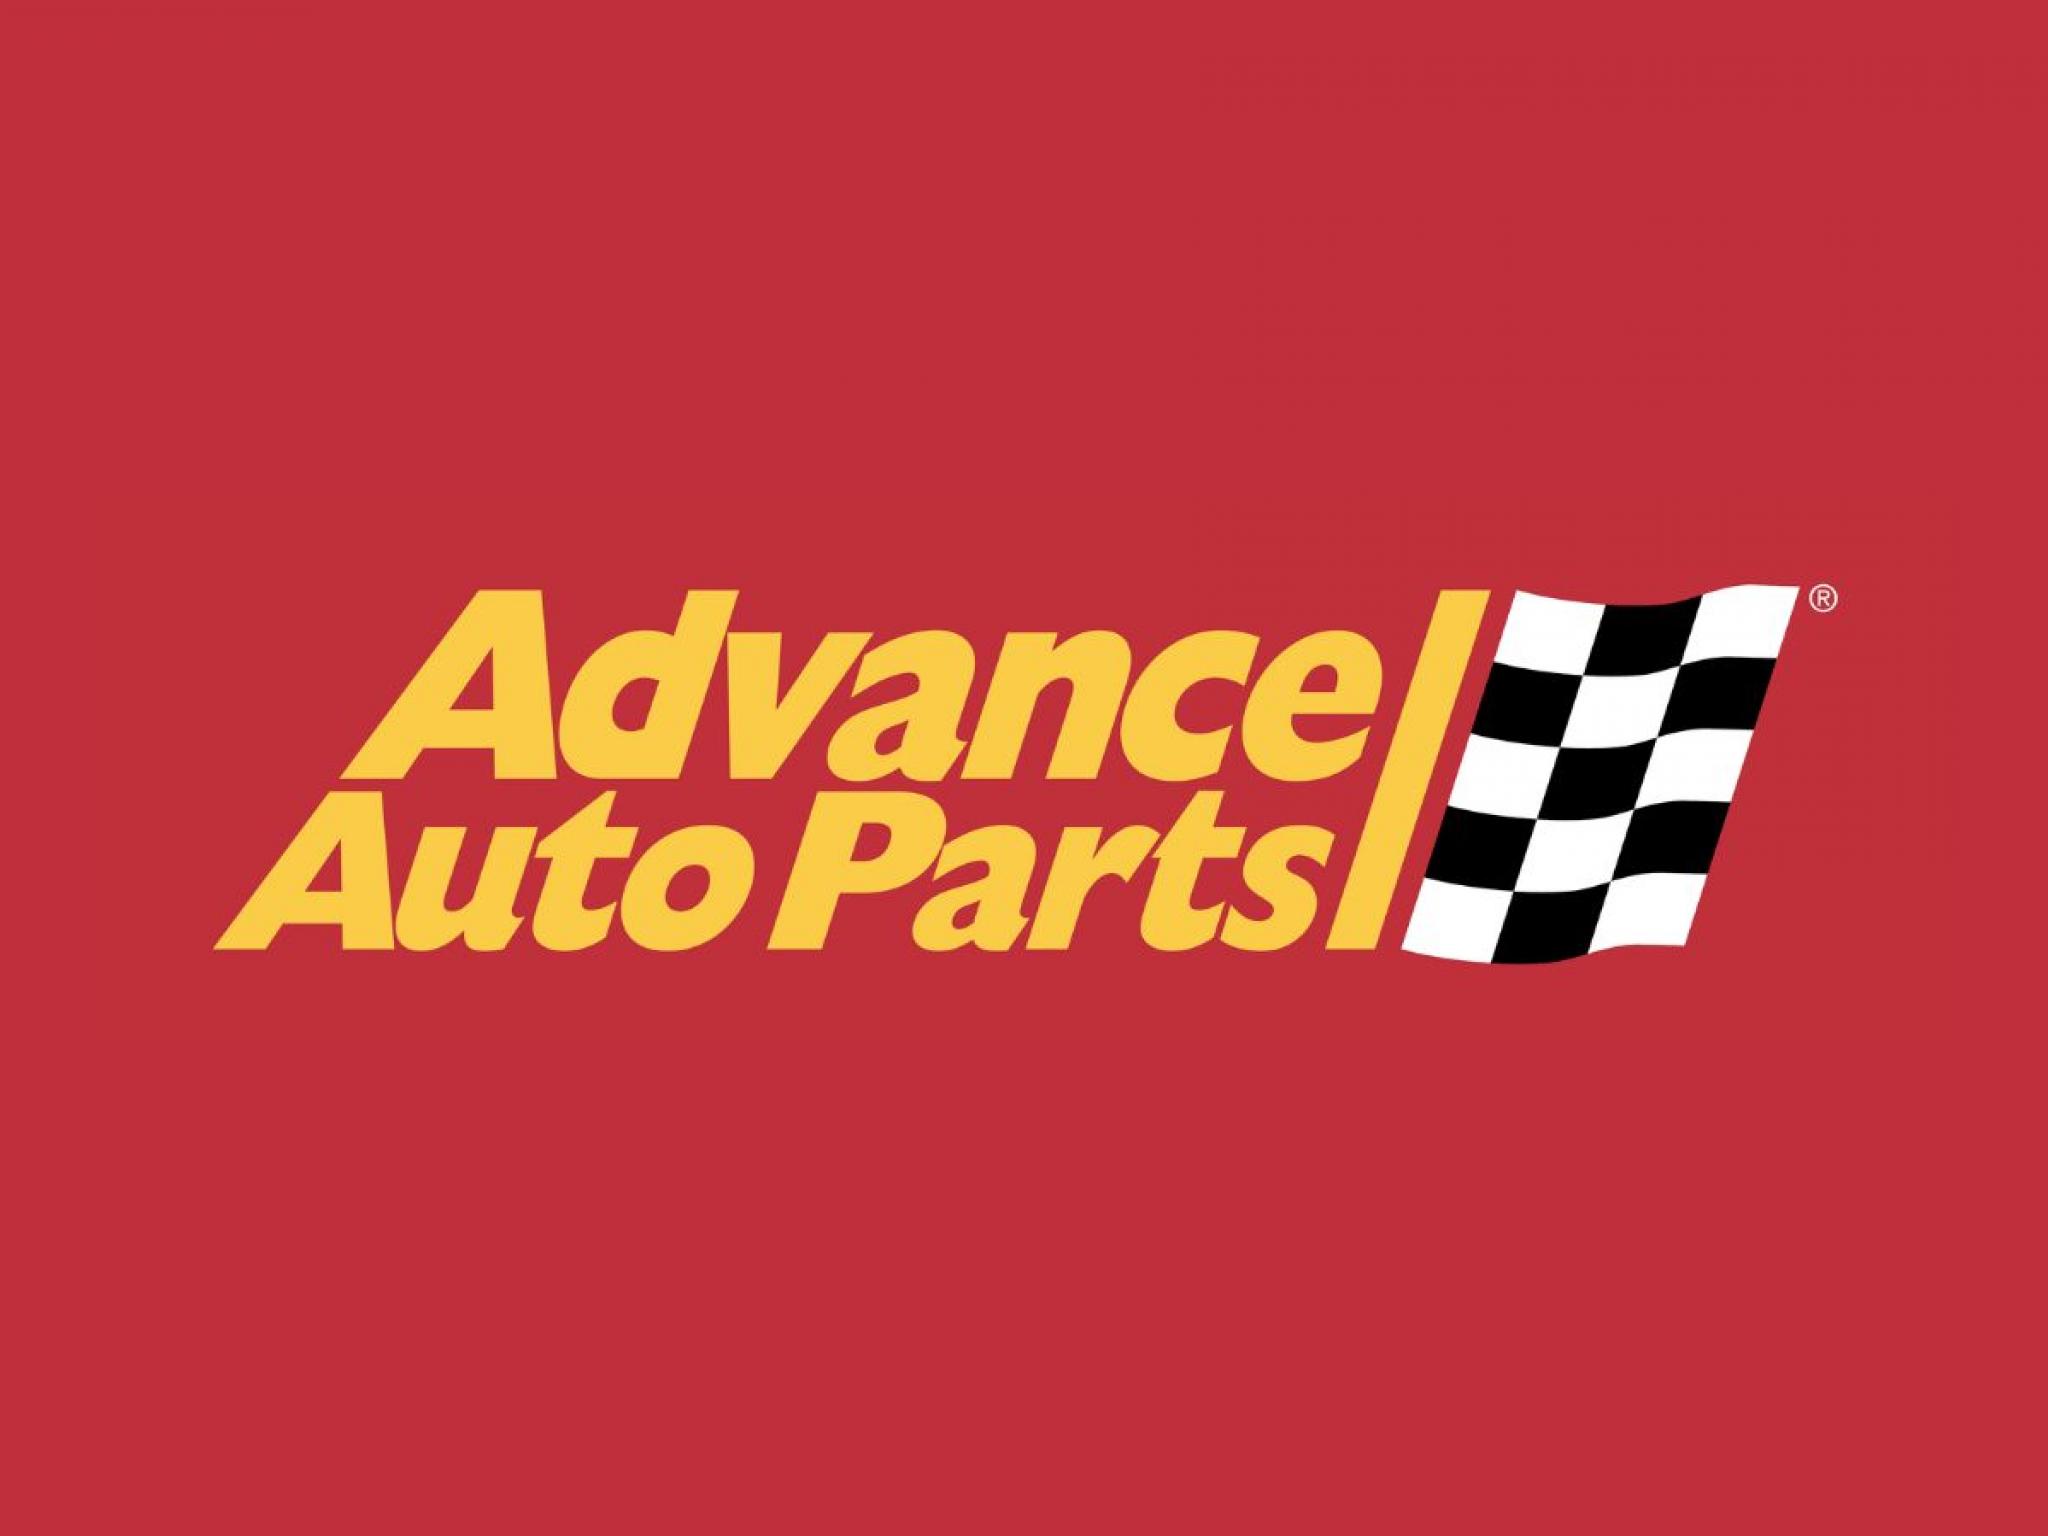  advance-auto-parts-reports-q4-results-joins-bg-foods-vipshop-adt-and-other-big-stocks-moving-higher-on-wednesday 